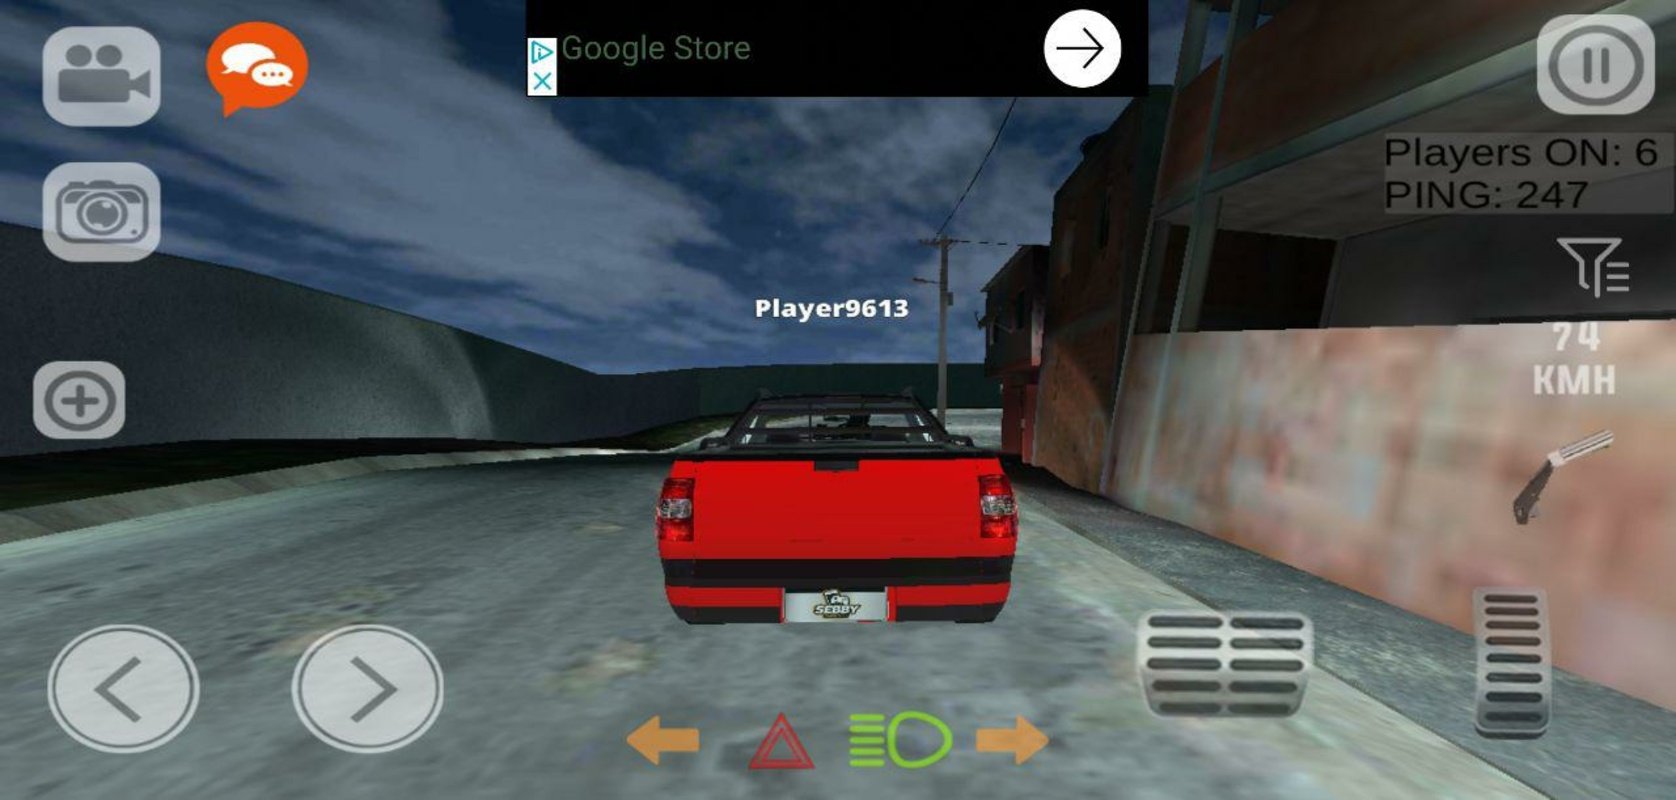 Carros Rebaixados Online - 4 Brazil Cars Driving - Android